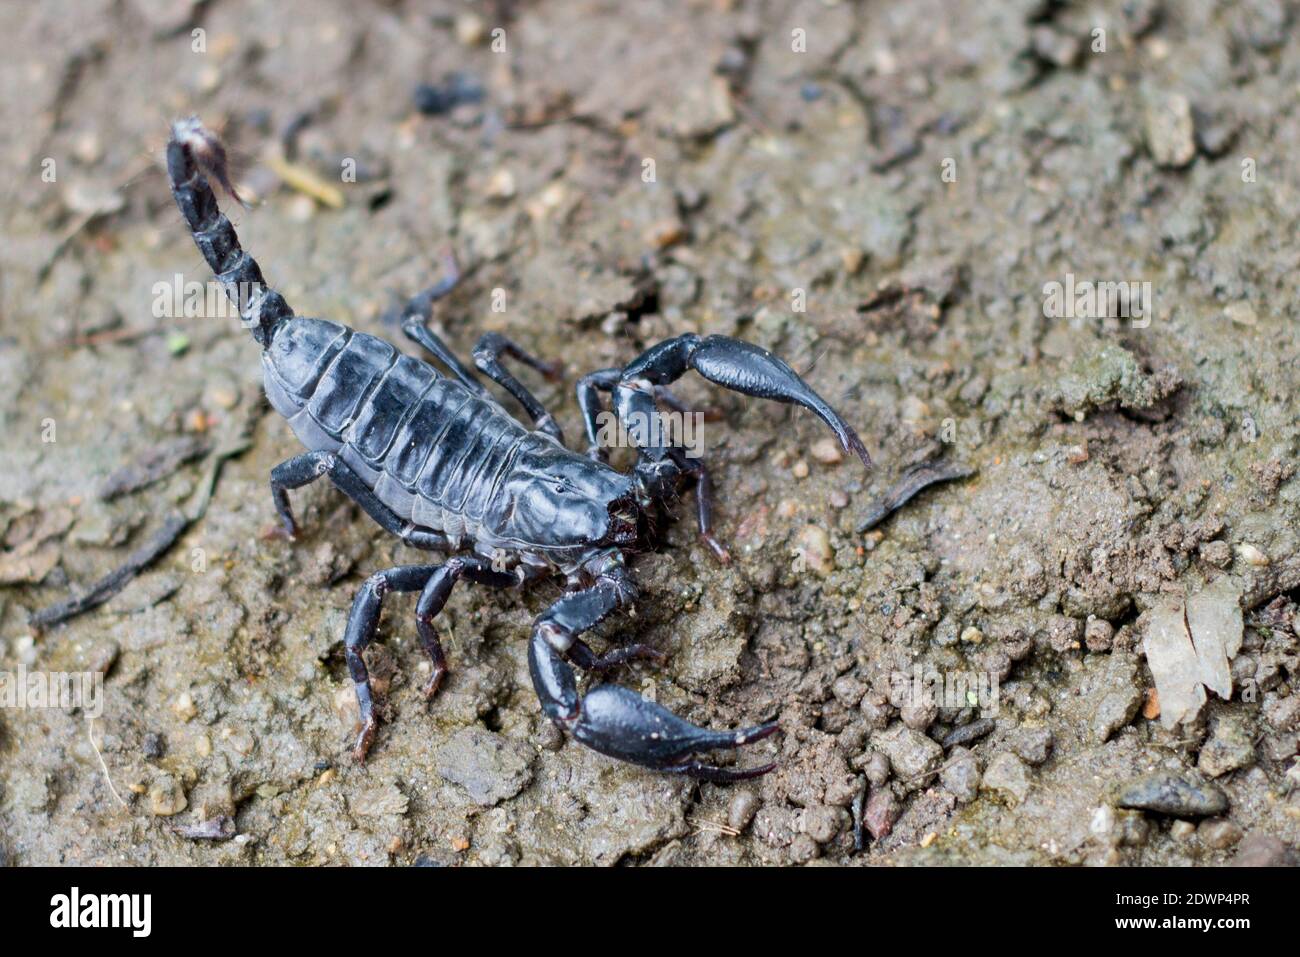 Image of scorpion on the ground. Animals. Insect. Stock Photo